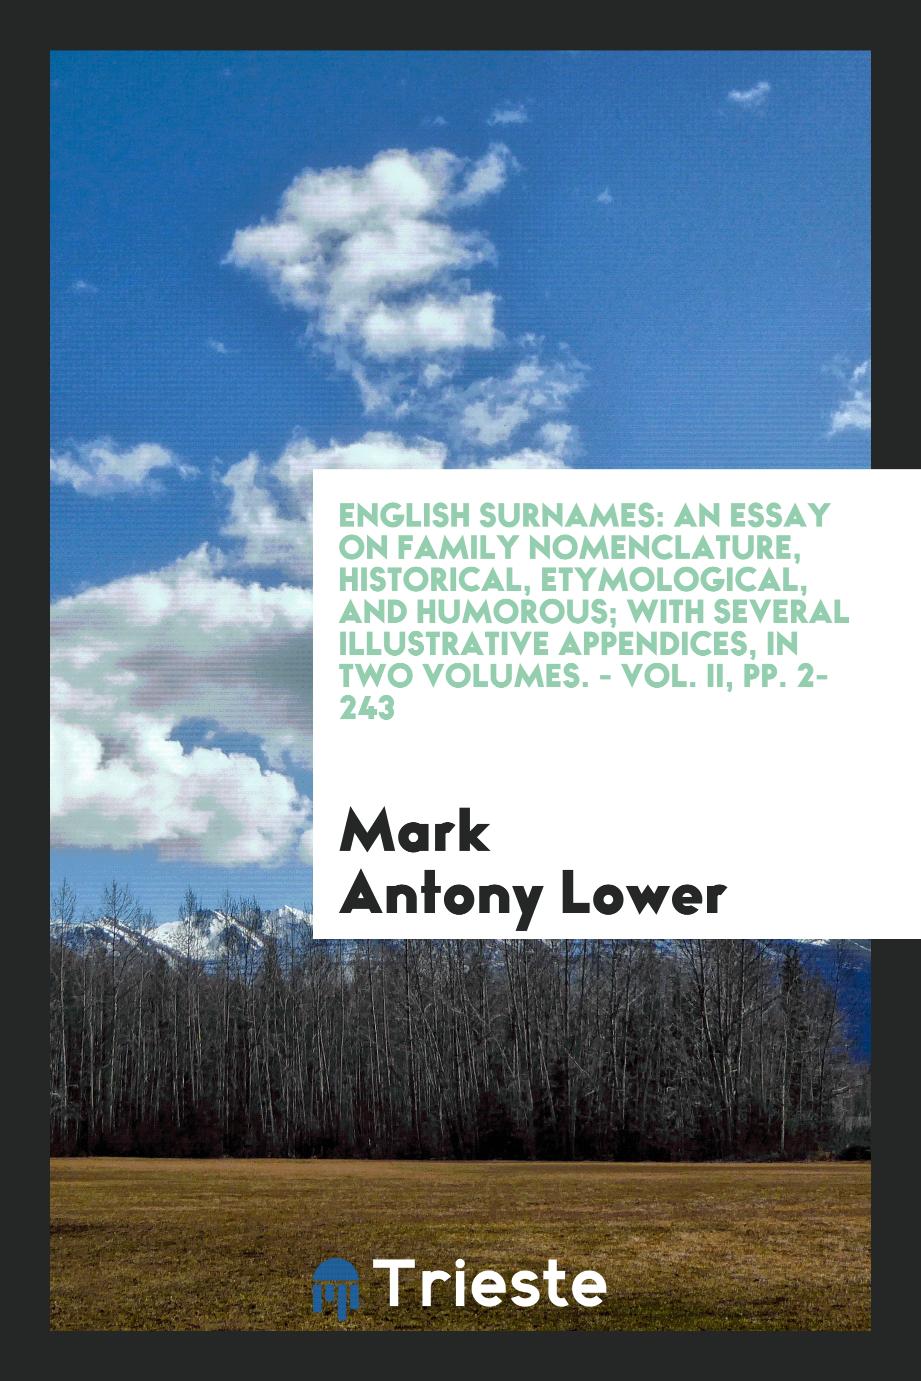 English Surnames: An Essay on Family Nomenclature, Historical, Etymological, and Humorous; With Several Illustrative Appendices, in Two Volumes. - Vol. II, pp. 2-243